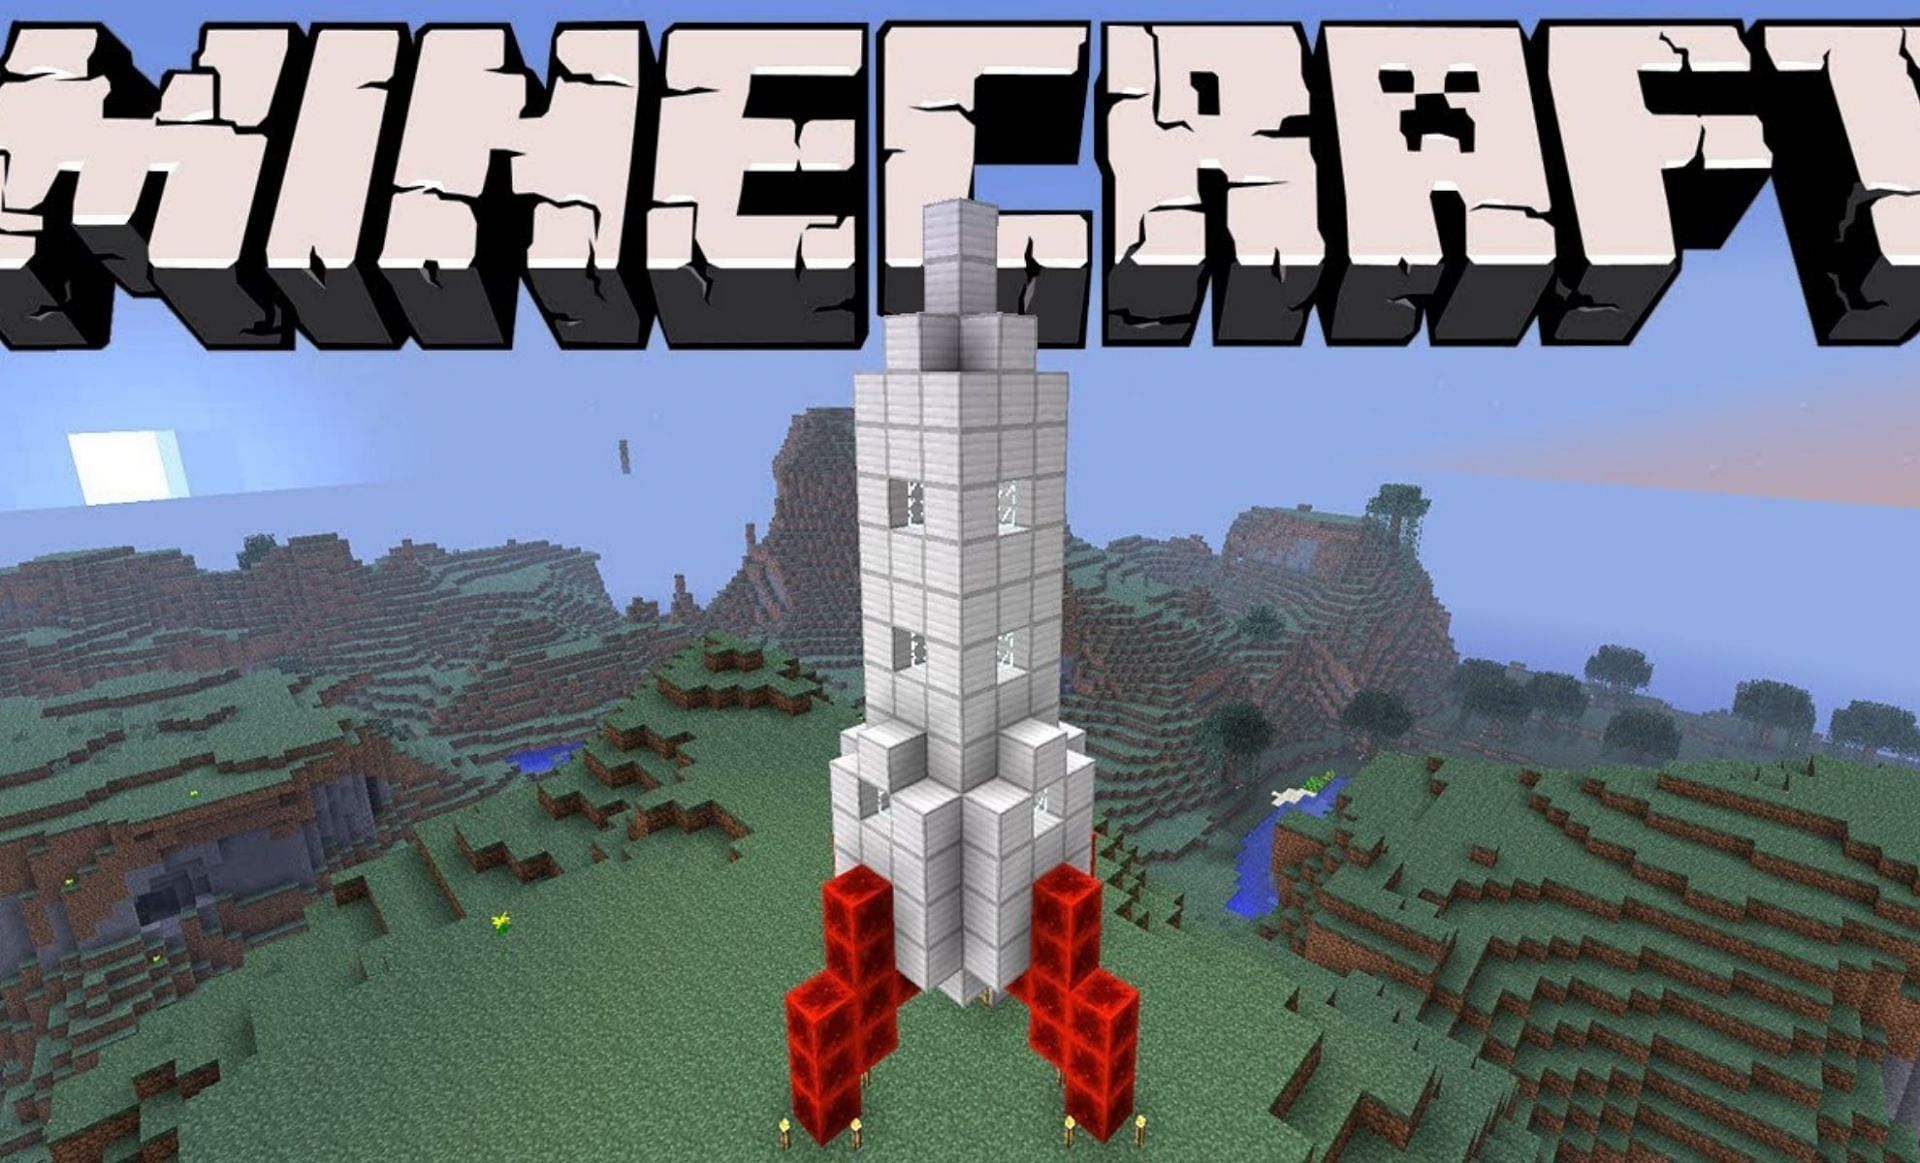 How to build a rocket ship in Minecraft